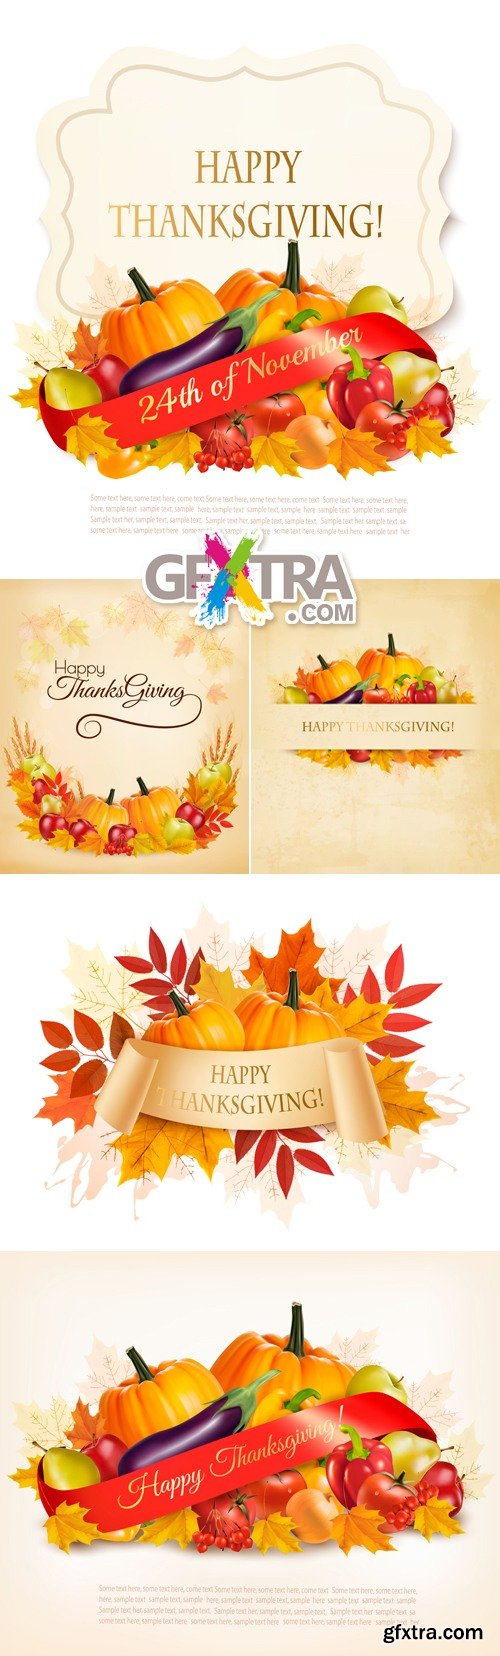 Thanksgiving Day Cards Vector